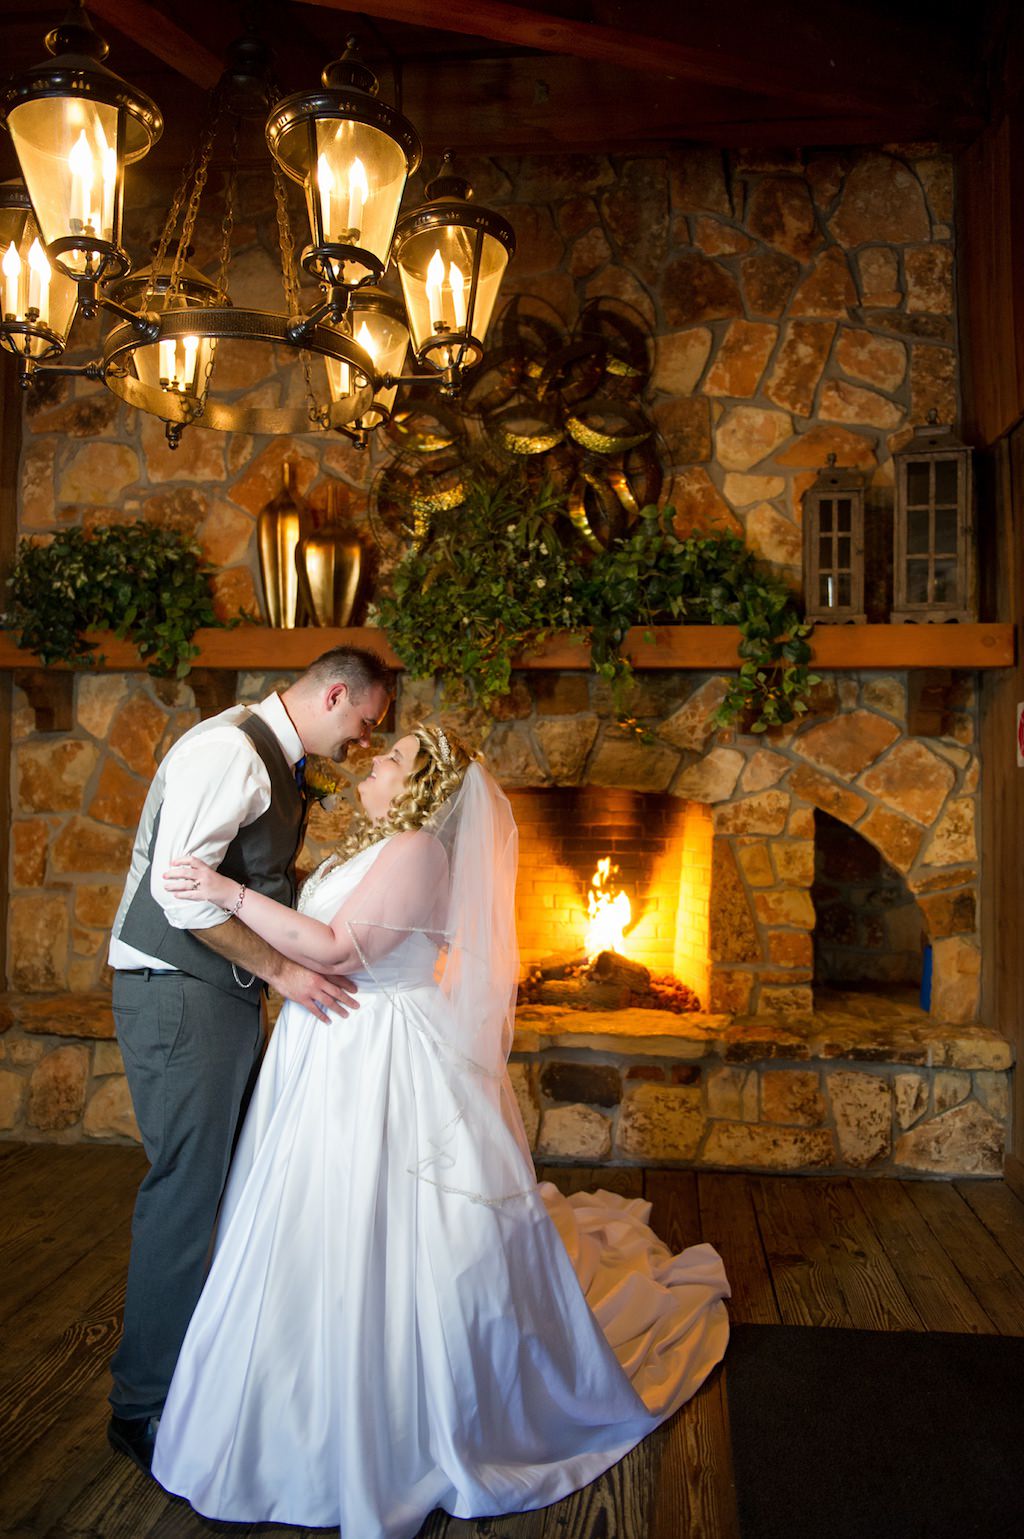 Rustic Bride and Groom Wedding Portrait in Front of Brick Fireplace | Tampa Bay Photographer Andi Diamond Photography | Tampa Venue Rusty Pelican